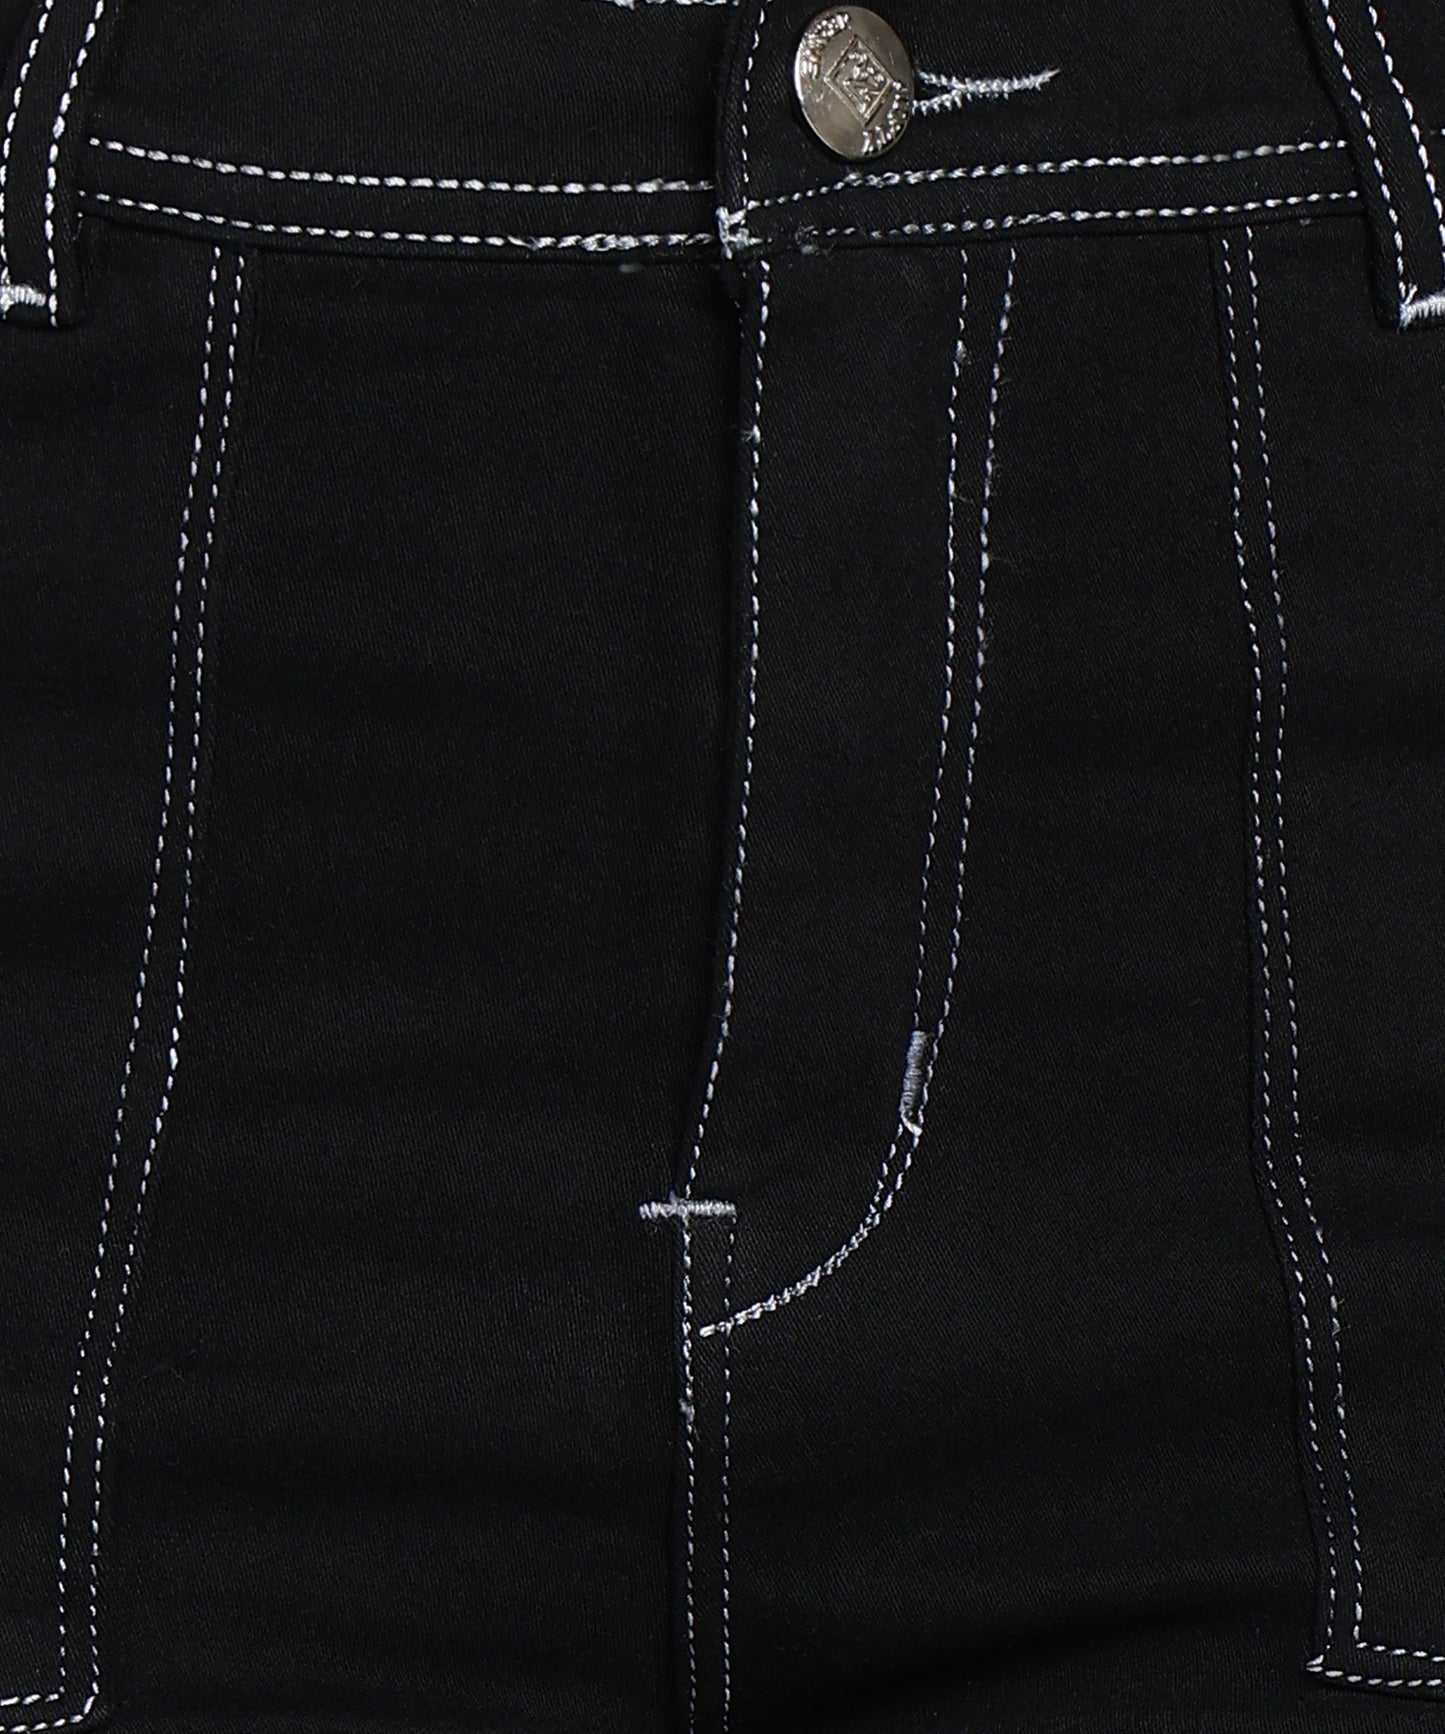 Straight Fit Stretchable Cargo Black Jeans - NiftyJeans